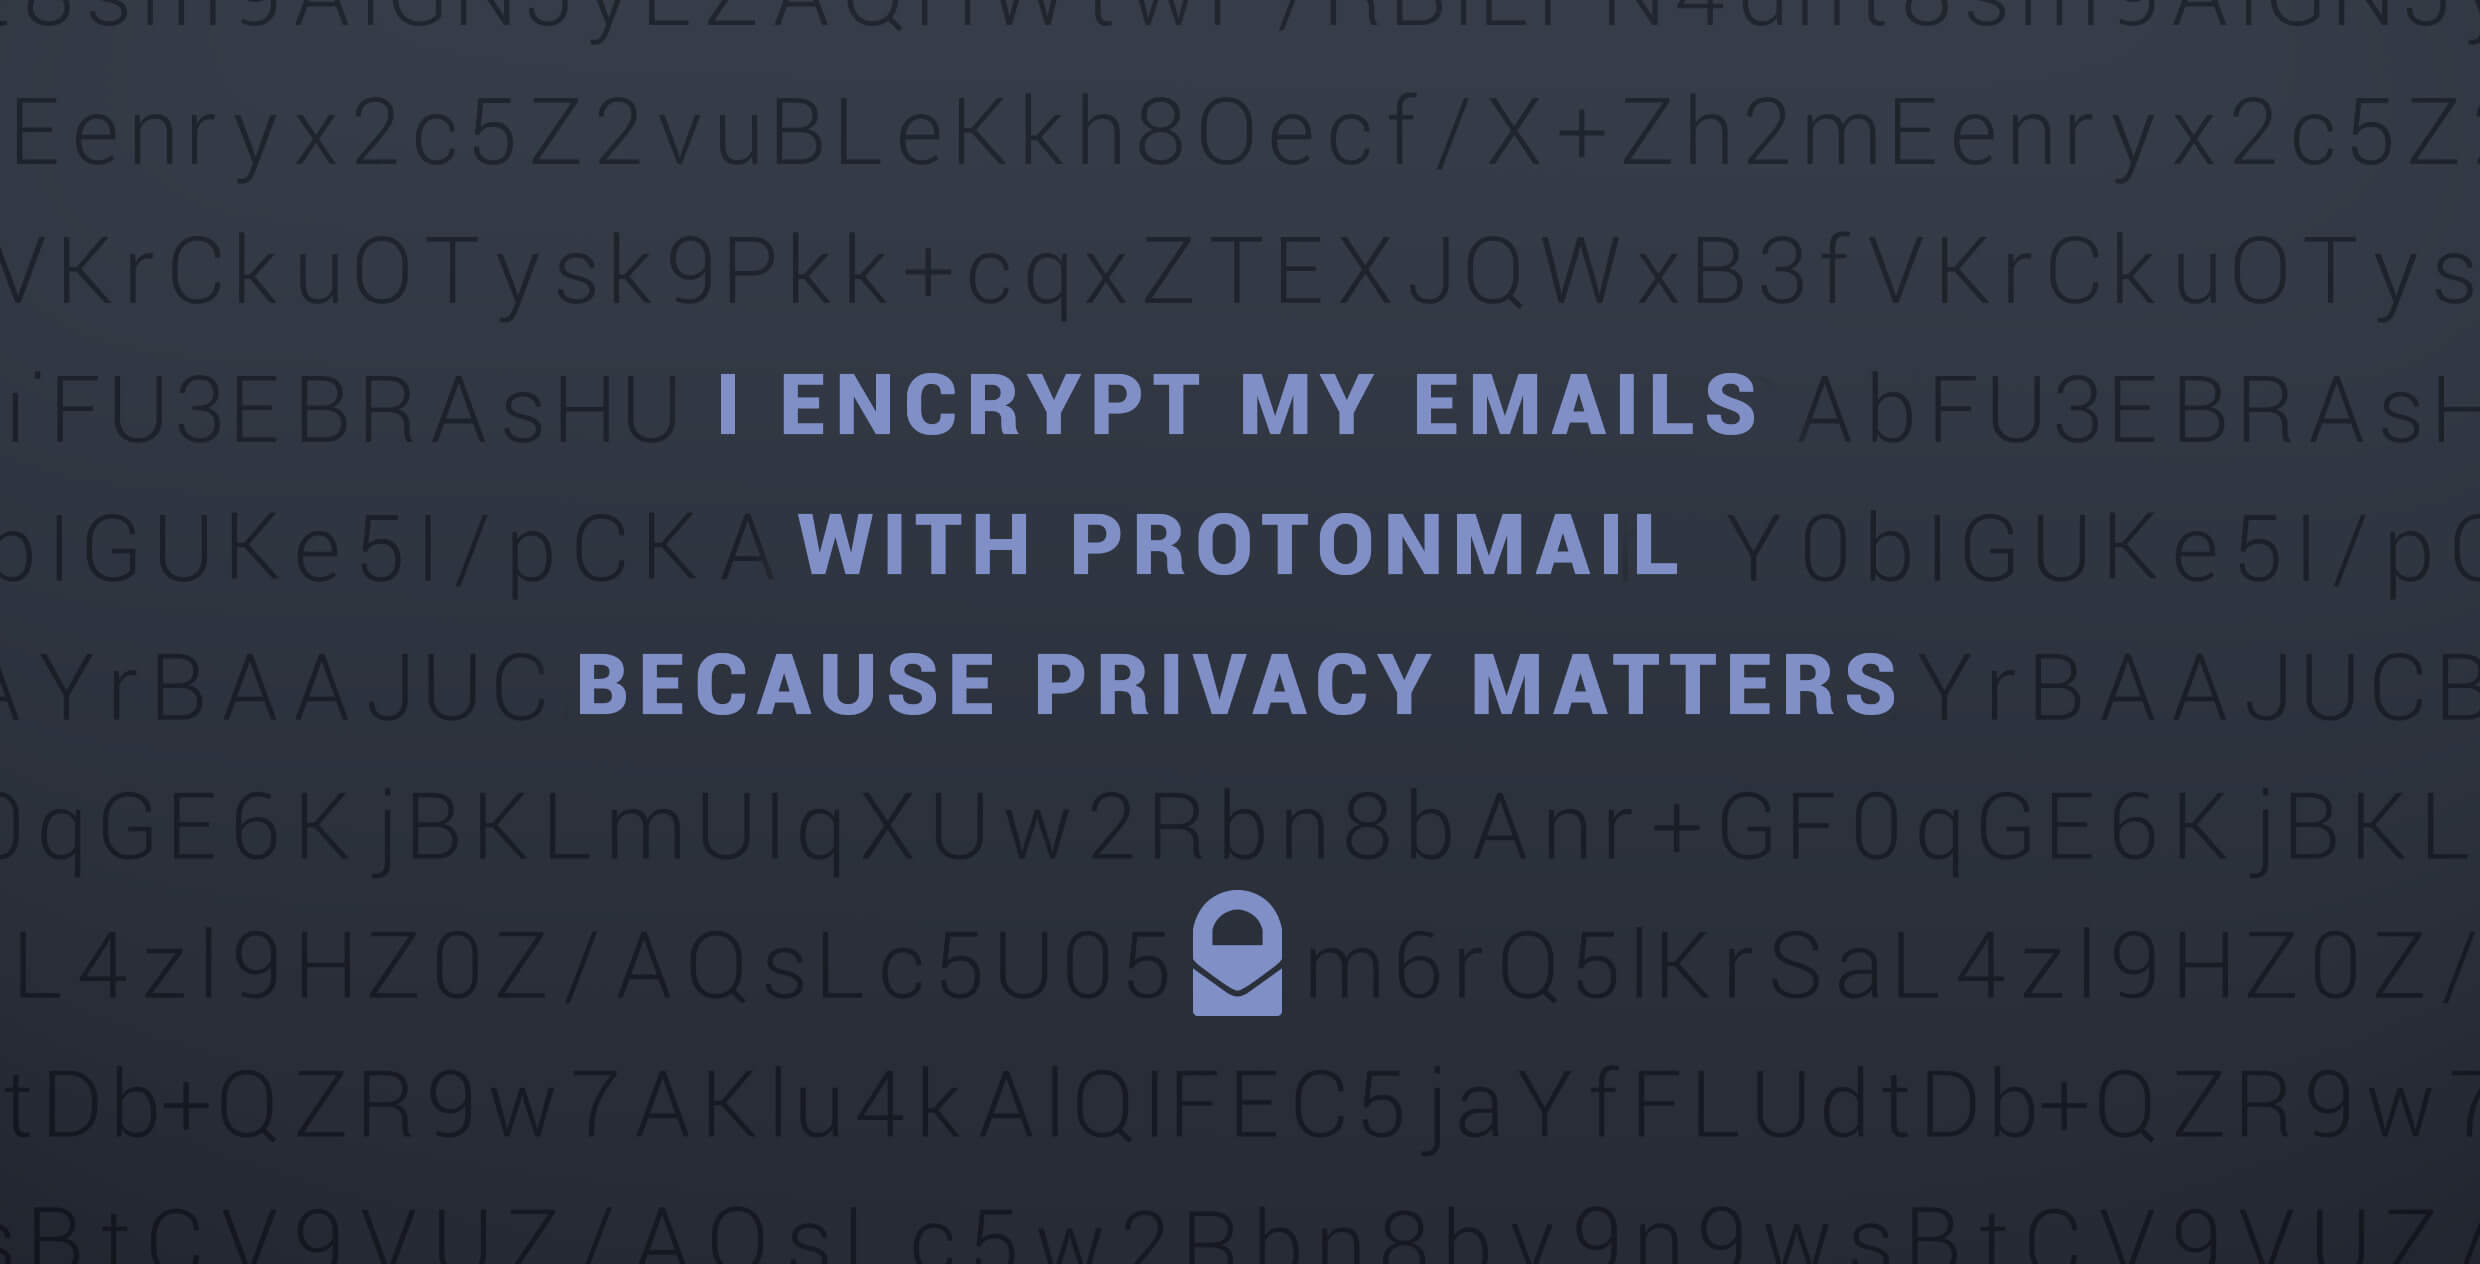 protonmail is safe